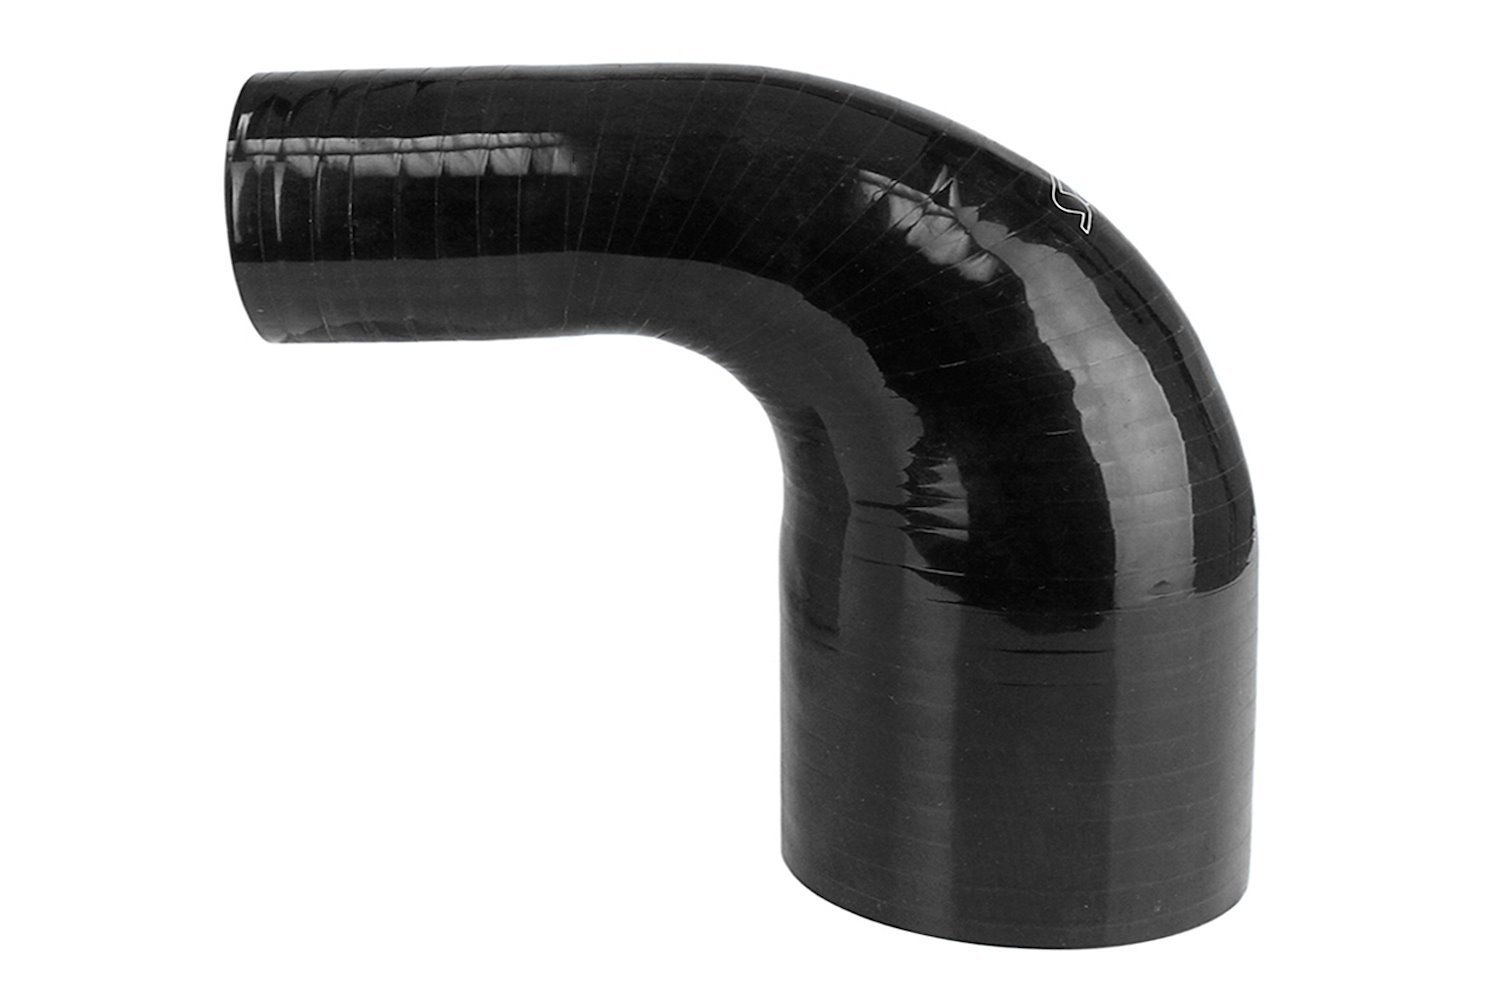 HTSER90-325-400-BLK Silicone 90-Degree Elbow Hose, High-Temp 4-Ply Reinforced, 3-1/4 in. - 4 in. ID, Black